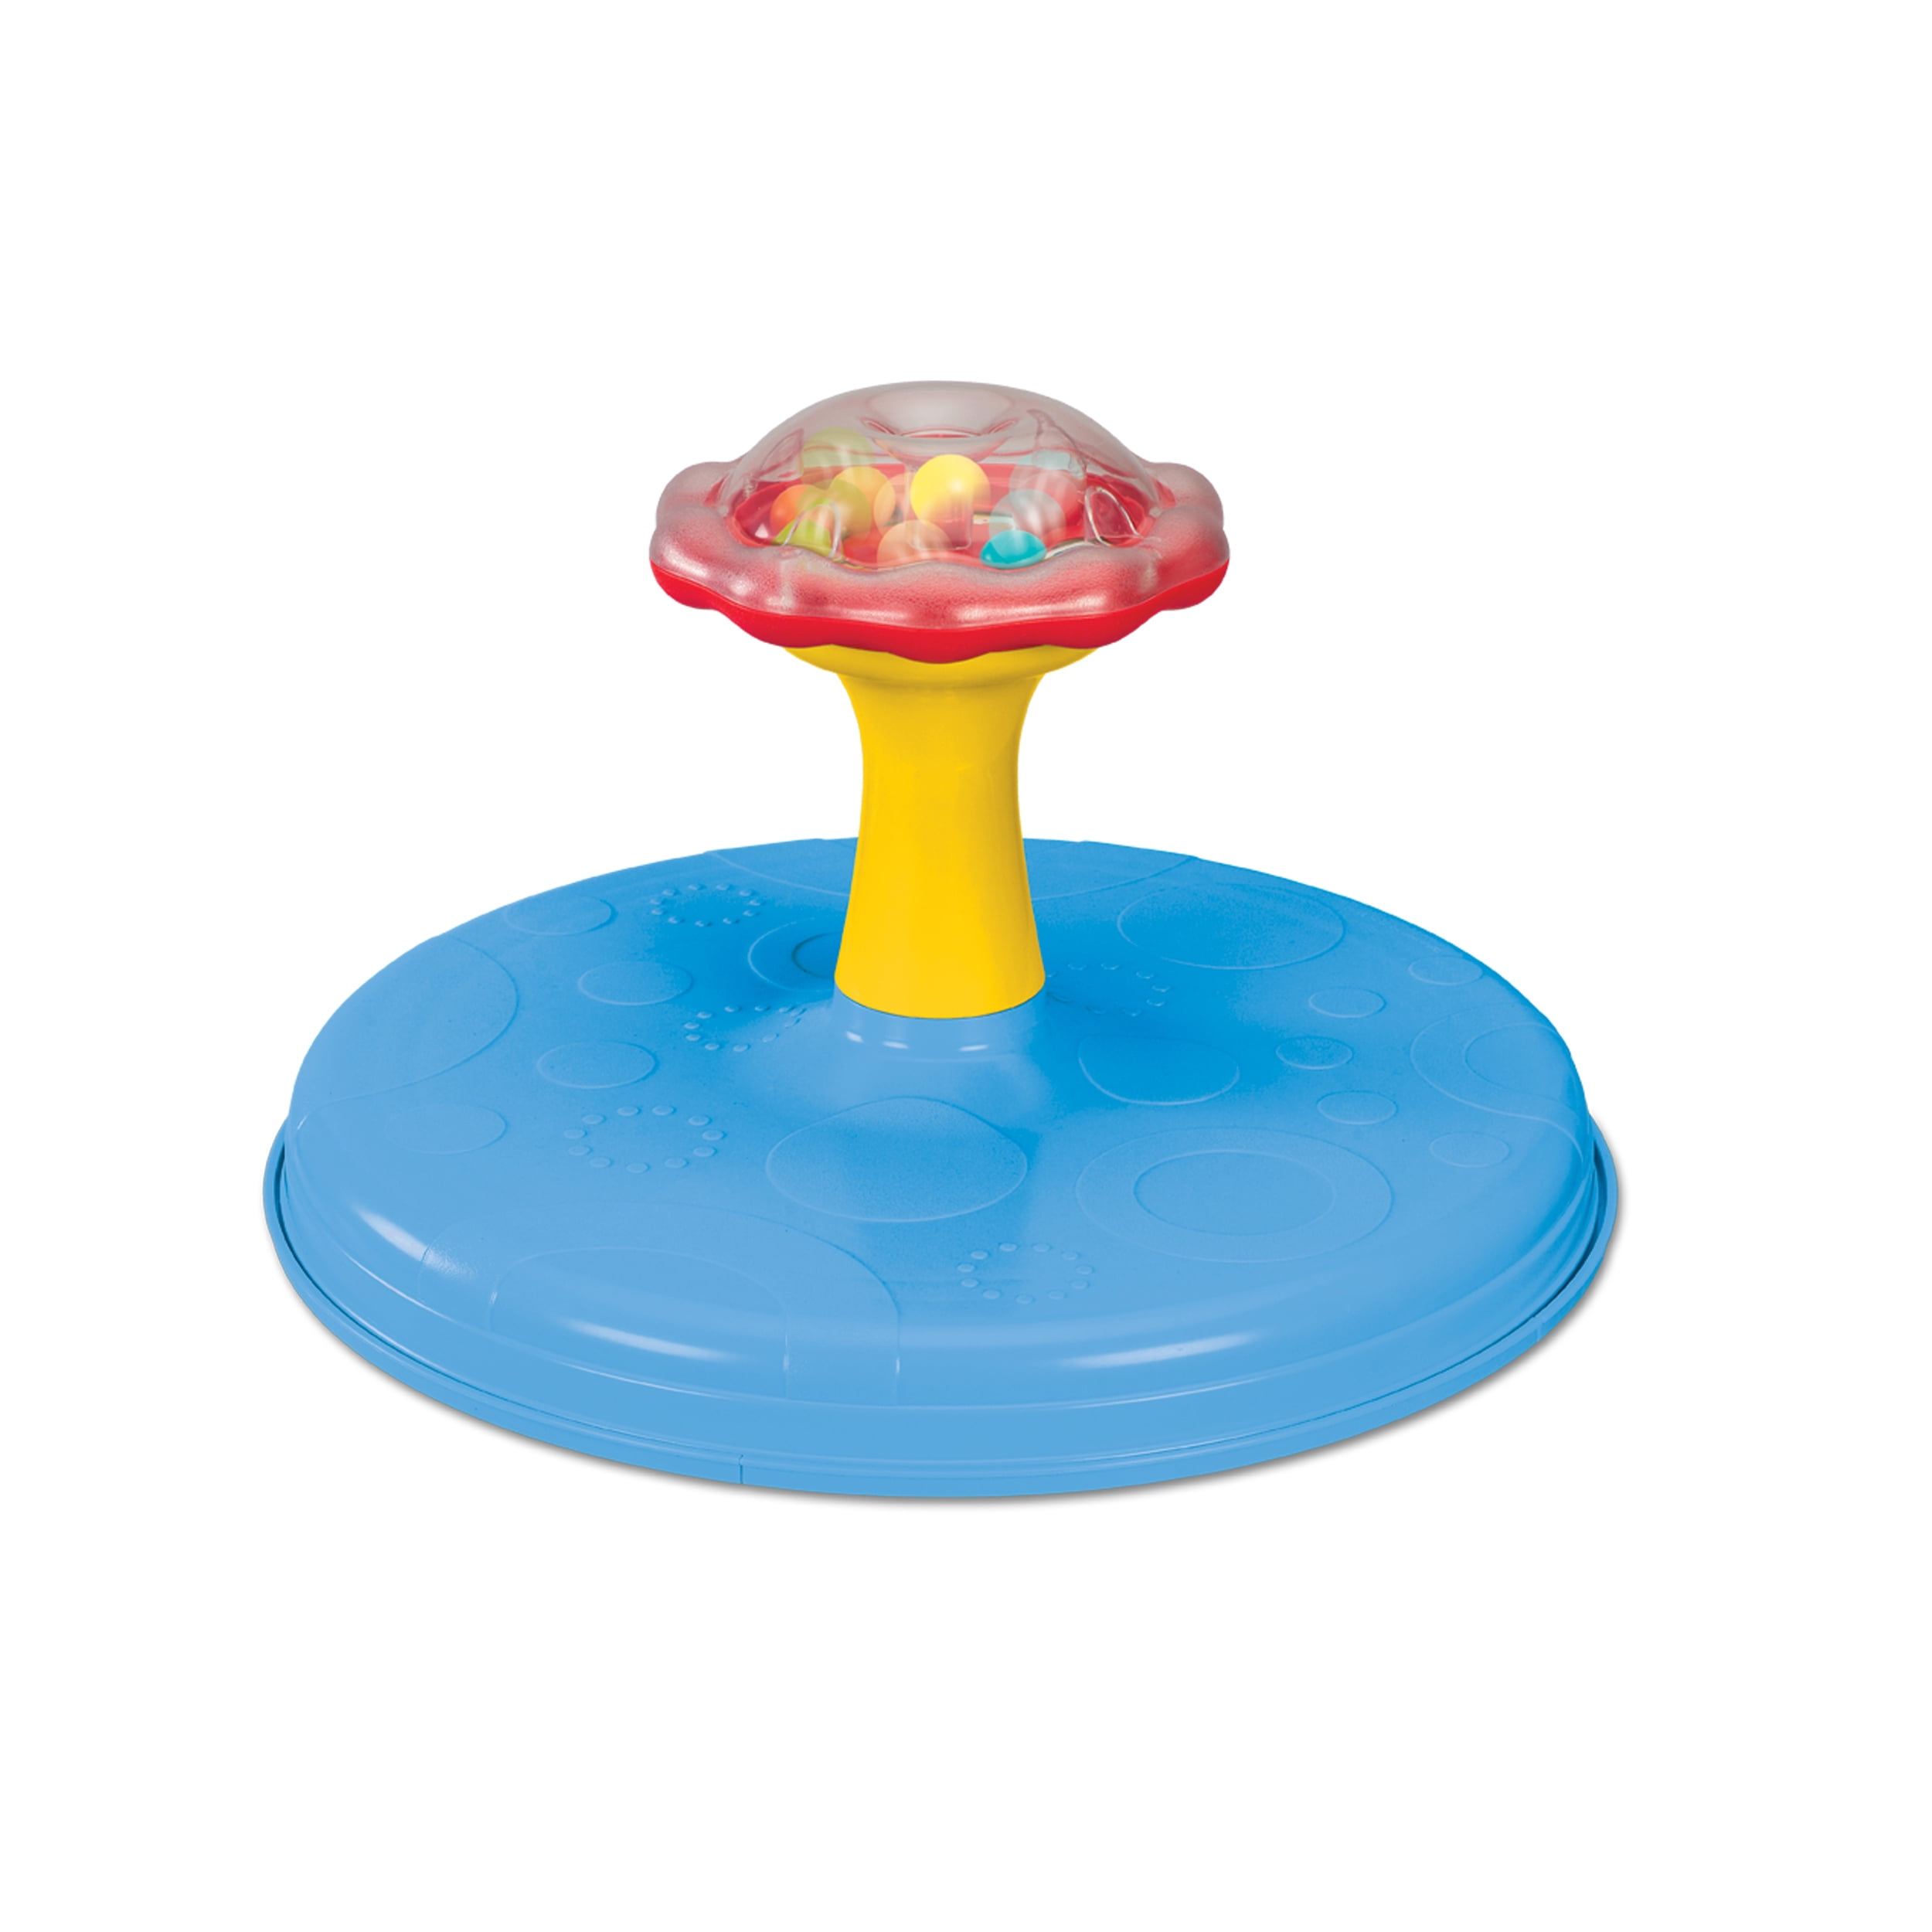 Grow'n up Multi-Color Twirl 'n Whirl Go-Round for Ages 18 to 36